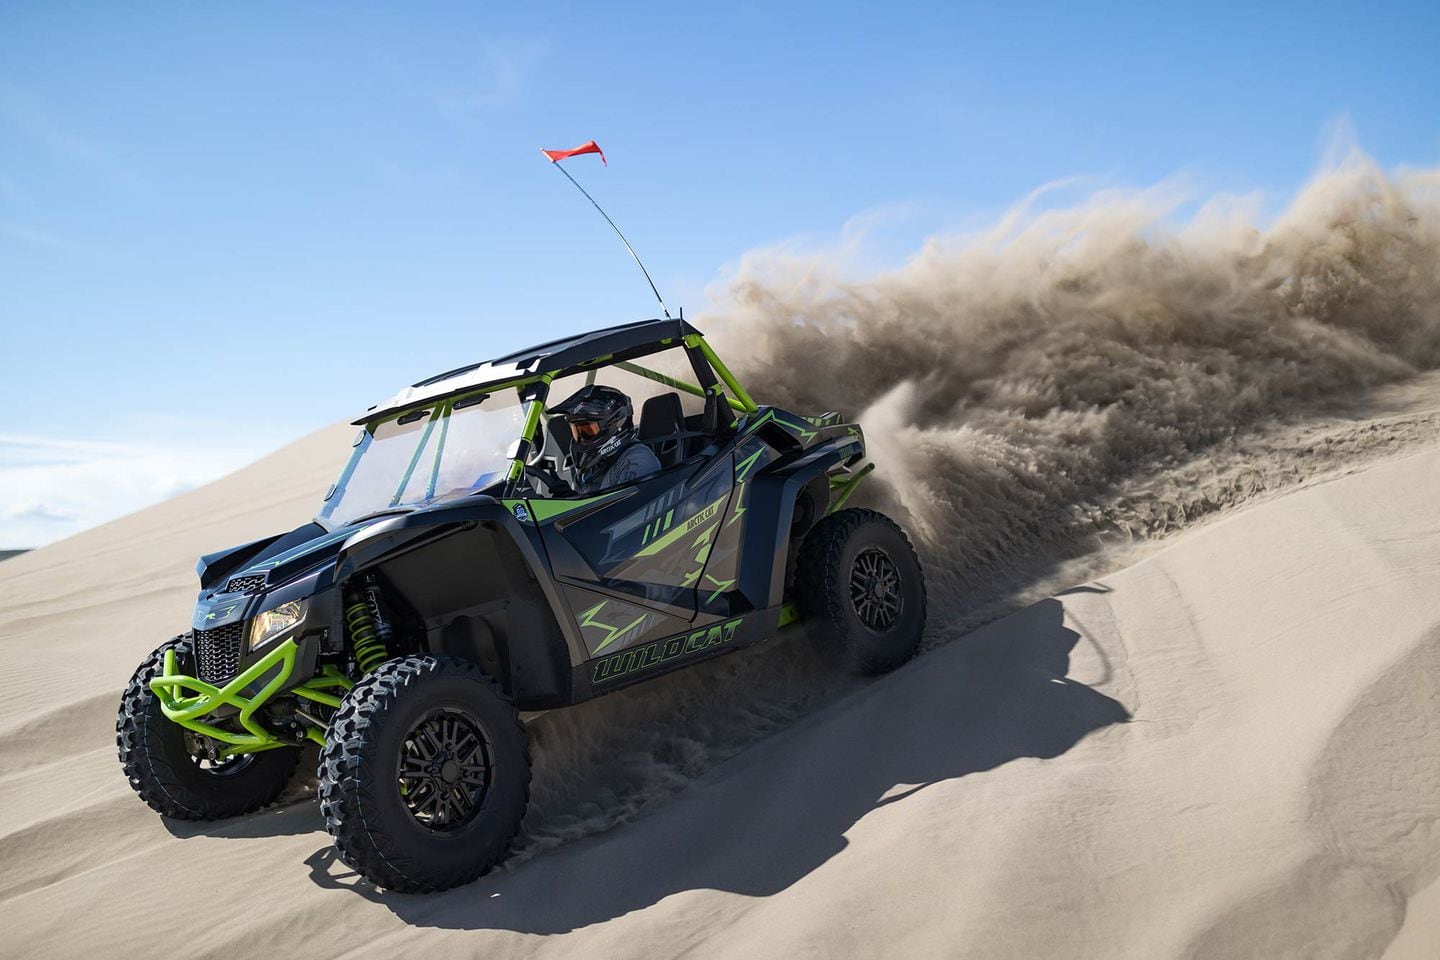 Arctic Cat Launches Refreshed 2022 Wildcat XX SidebySide UTV Driver